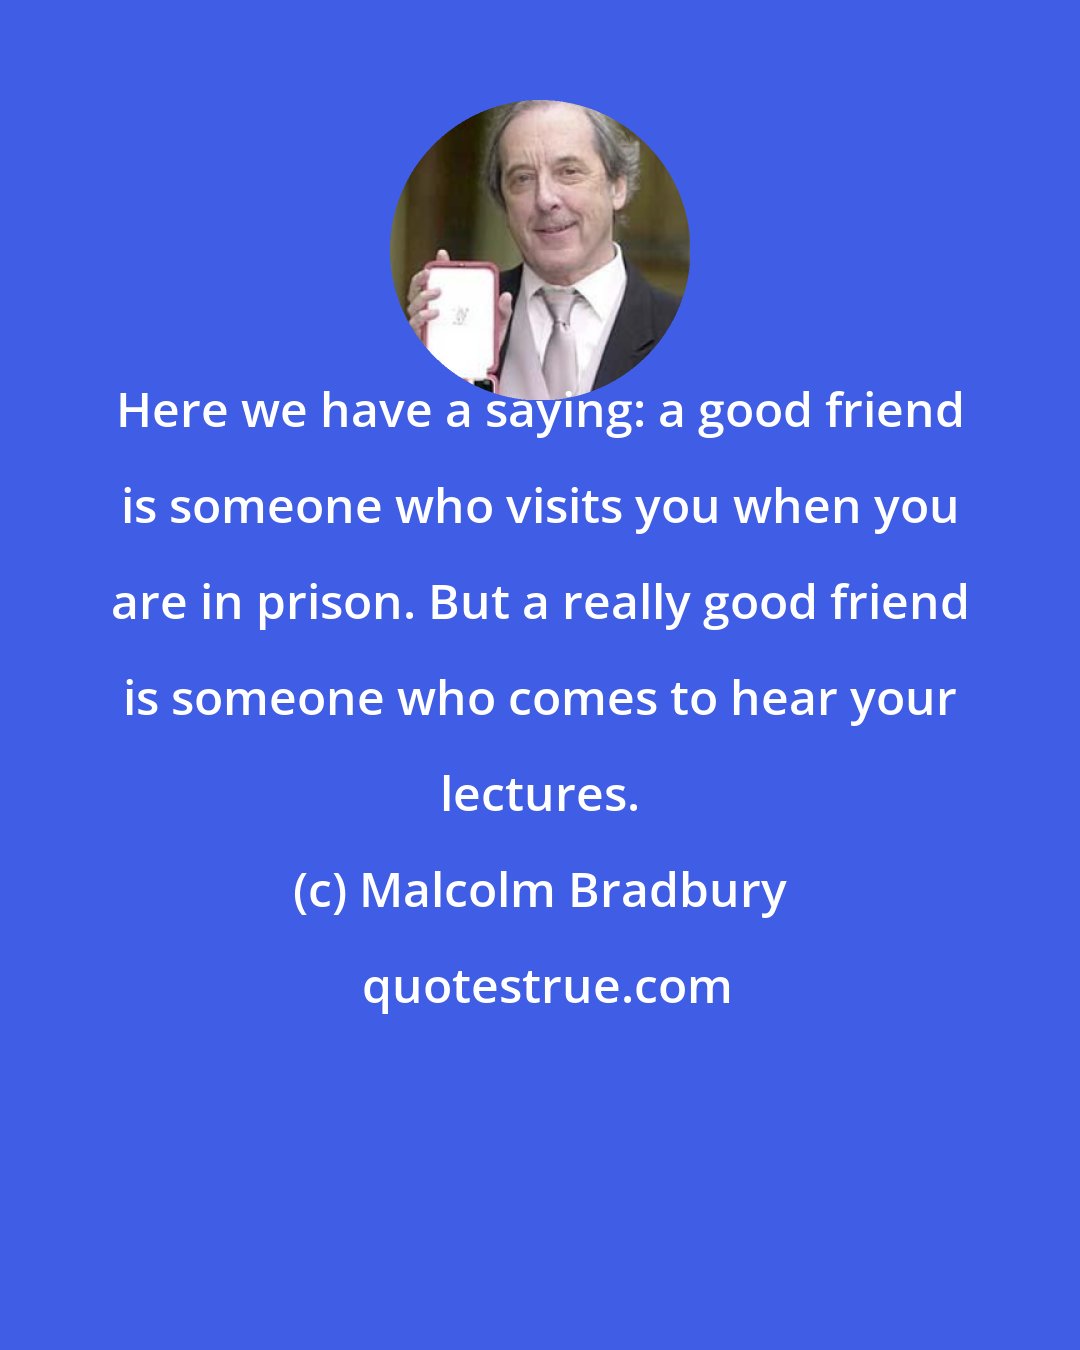 Malcolm Bradbury: Here we have a saying: a good friend is someone who visits you when you are in prison. But a really good friend is someone who comes to hear your lectures.